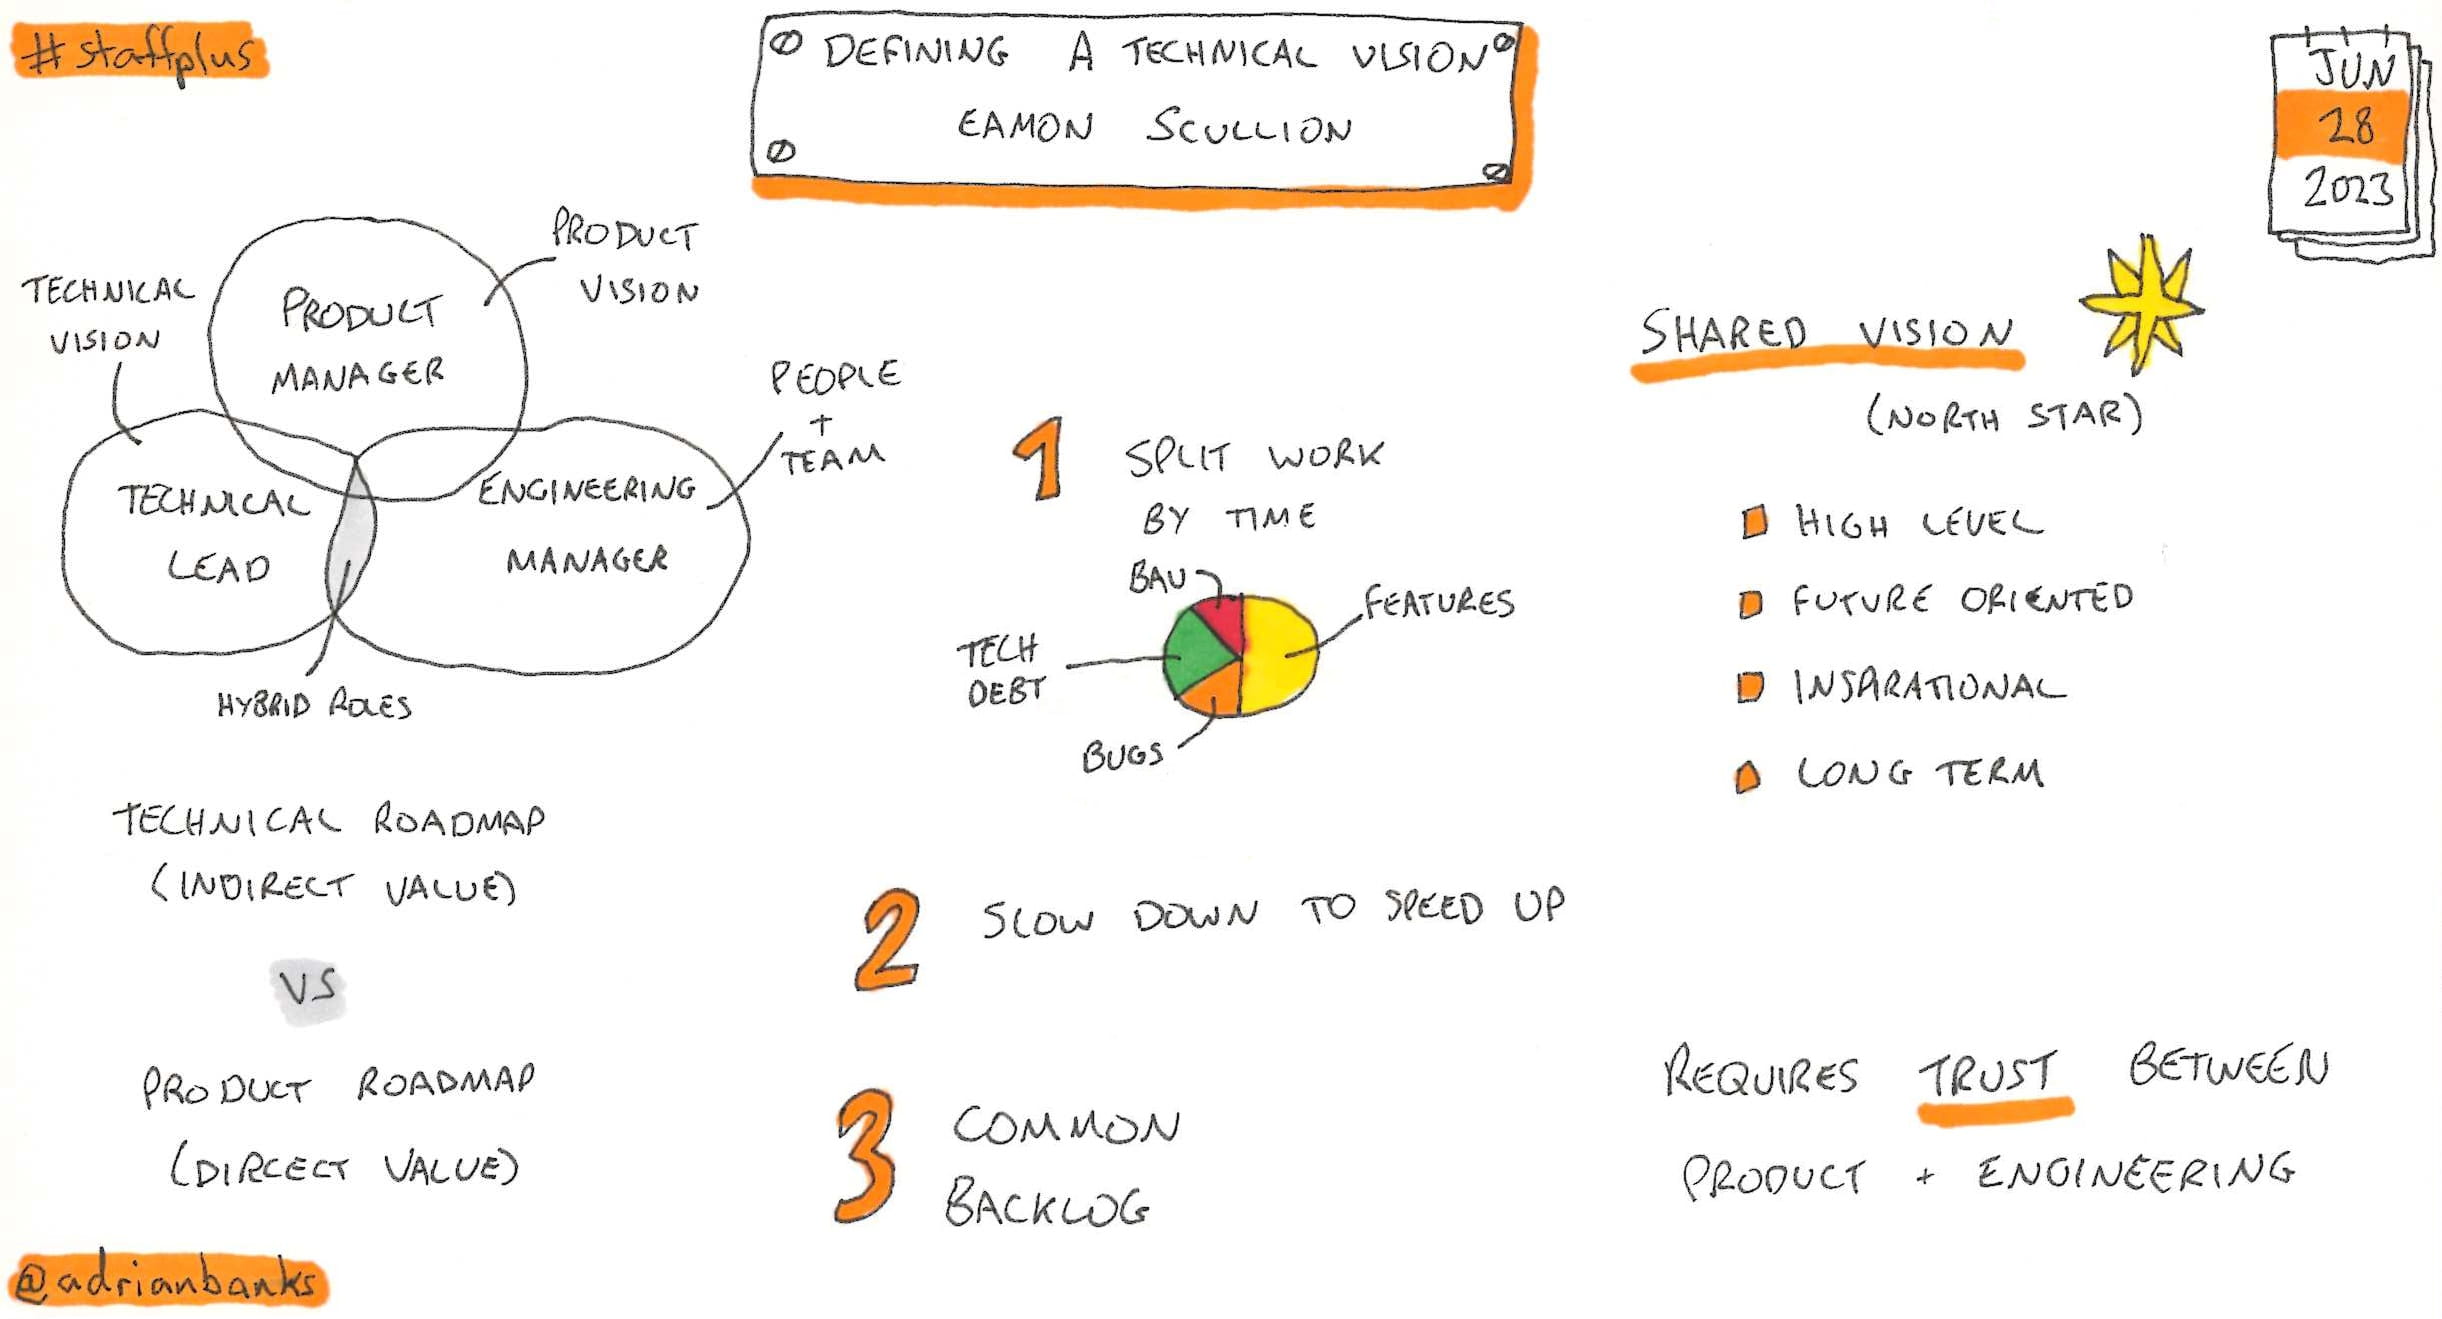 Defining A Technical Visiion by Eamon Scullion